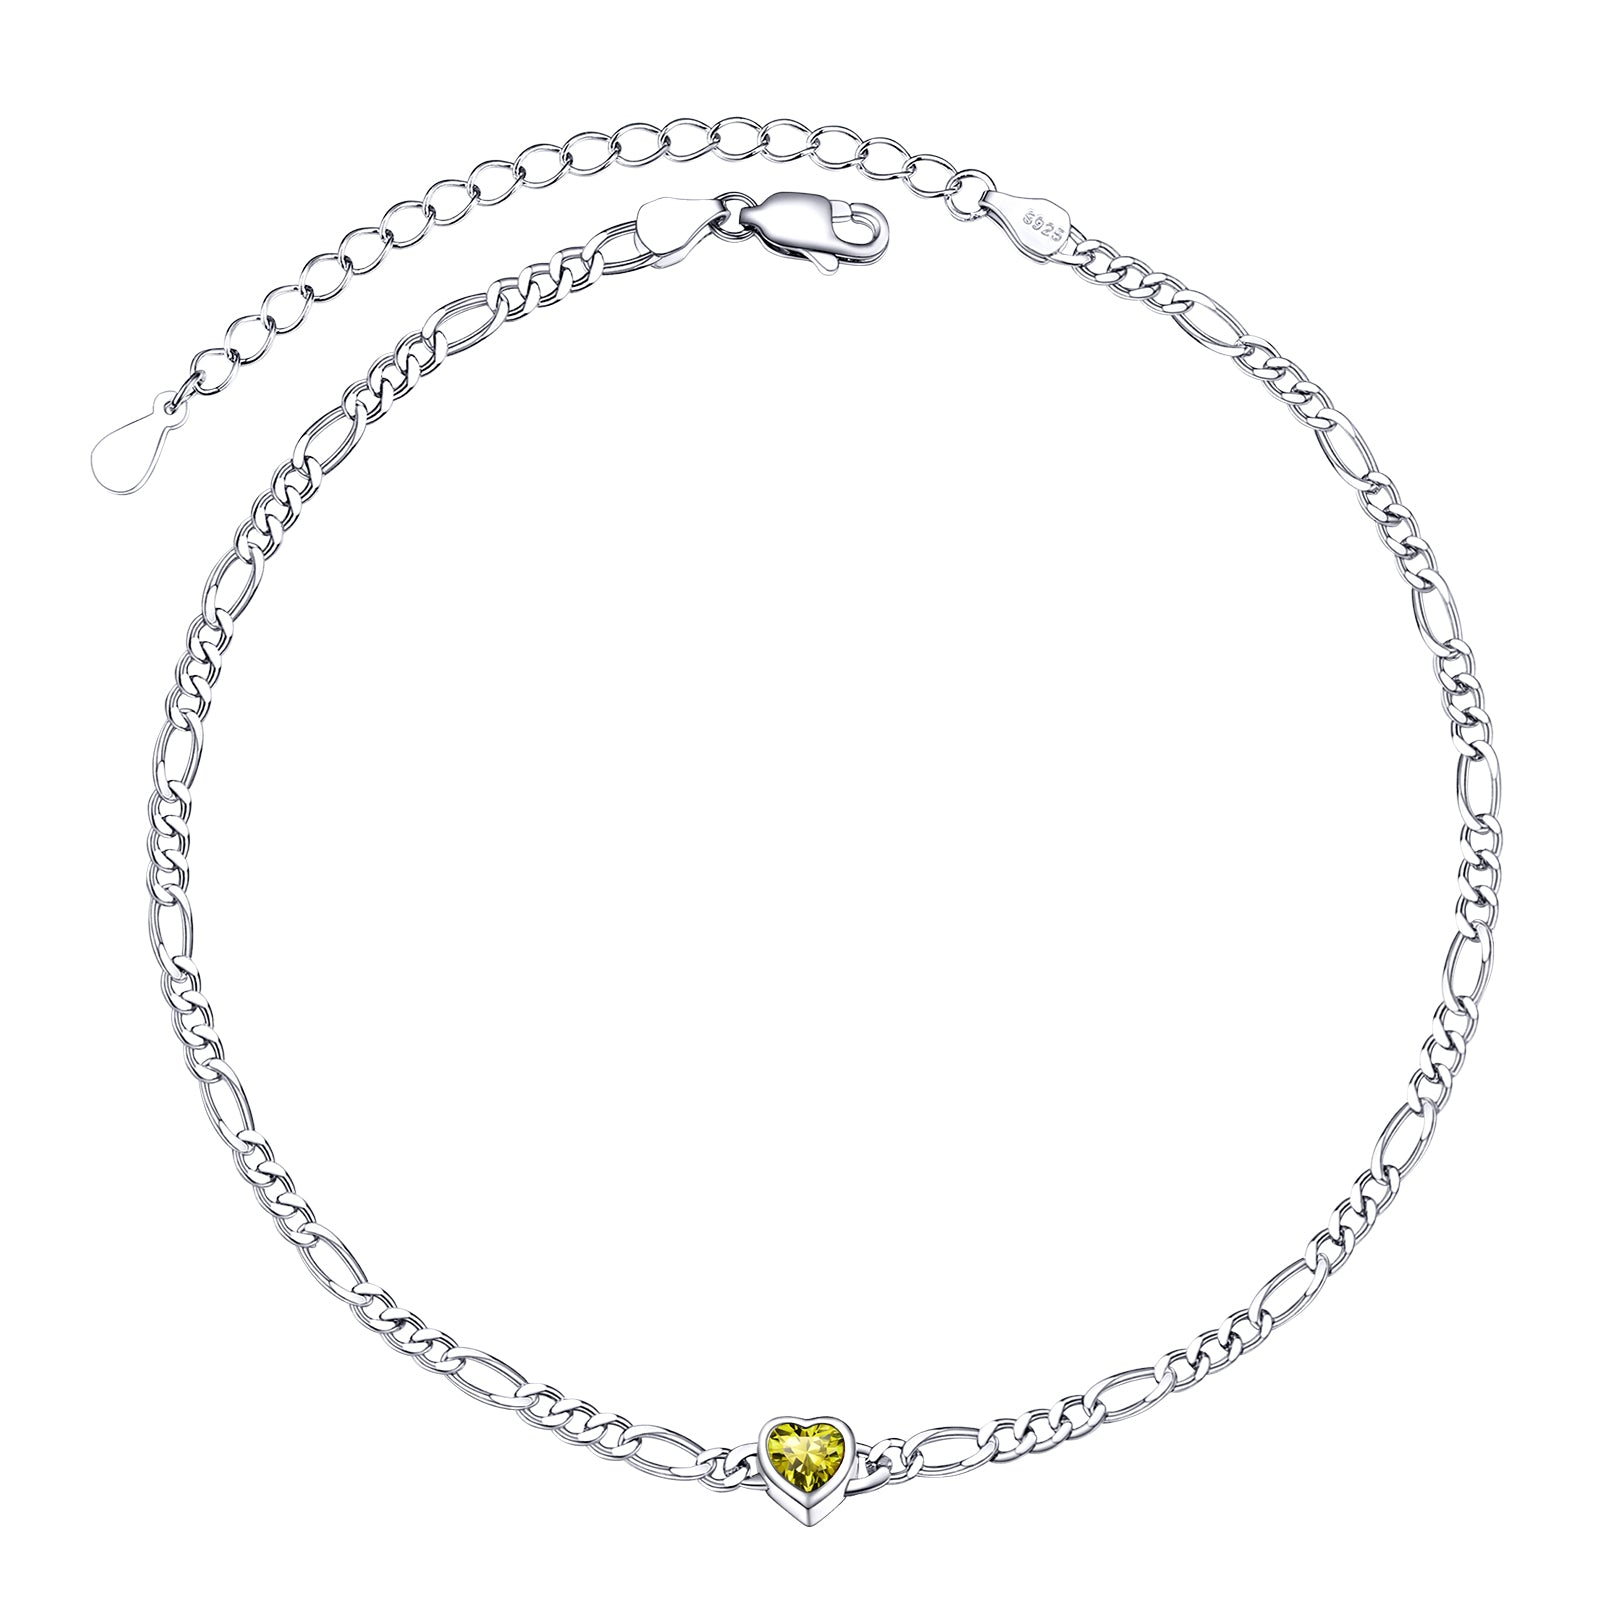 Birthstones Jewelry silver anklets